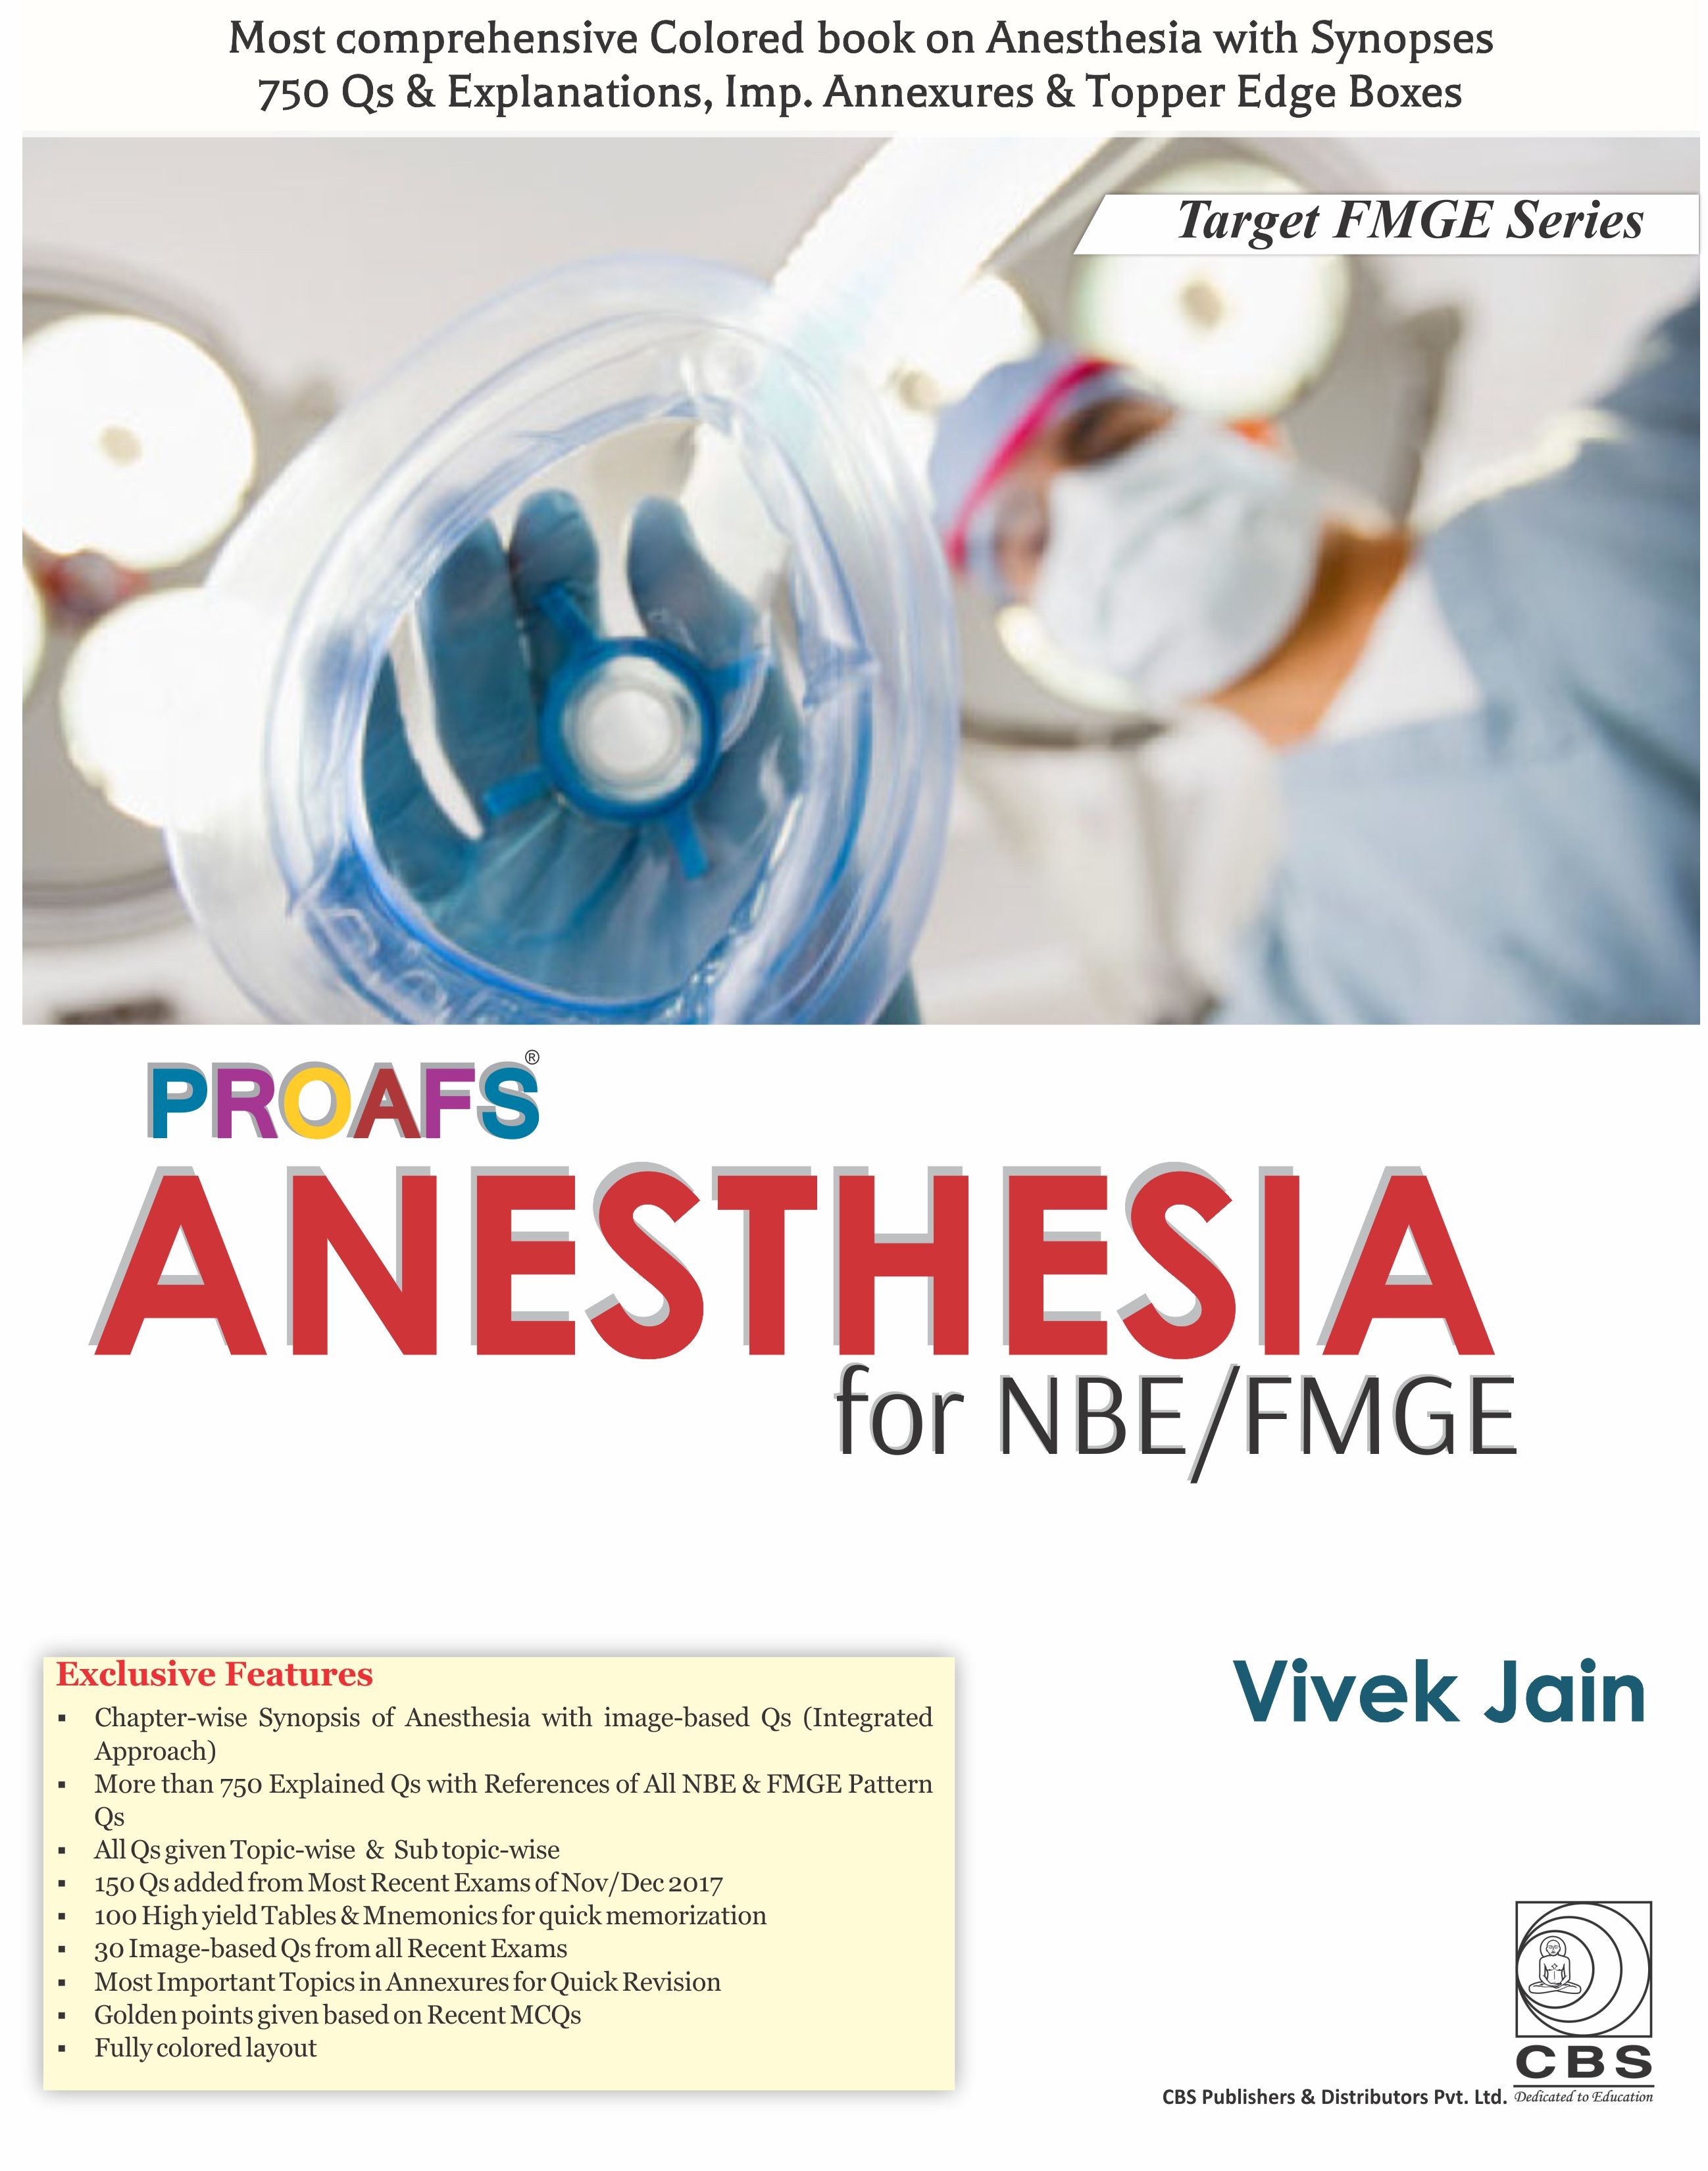 PROAFS ANESTHESIA FOR NBE FMGE (PB 2018)  (TARGET FMGE SERIES) 